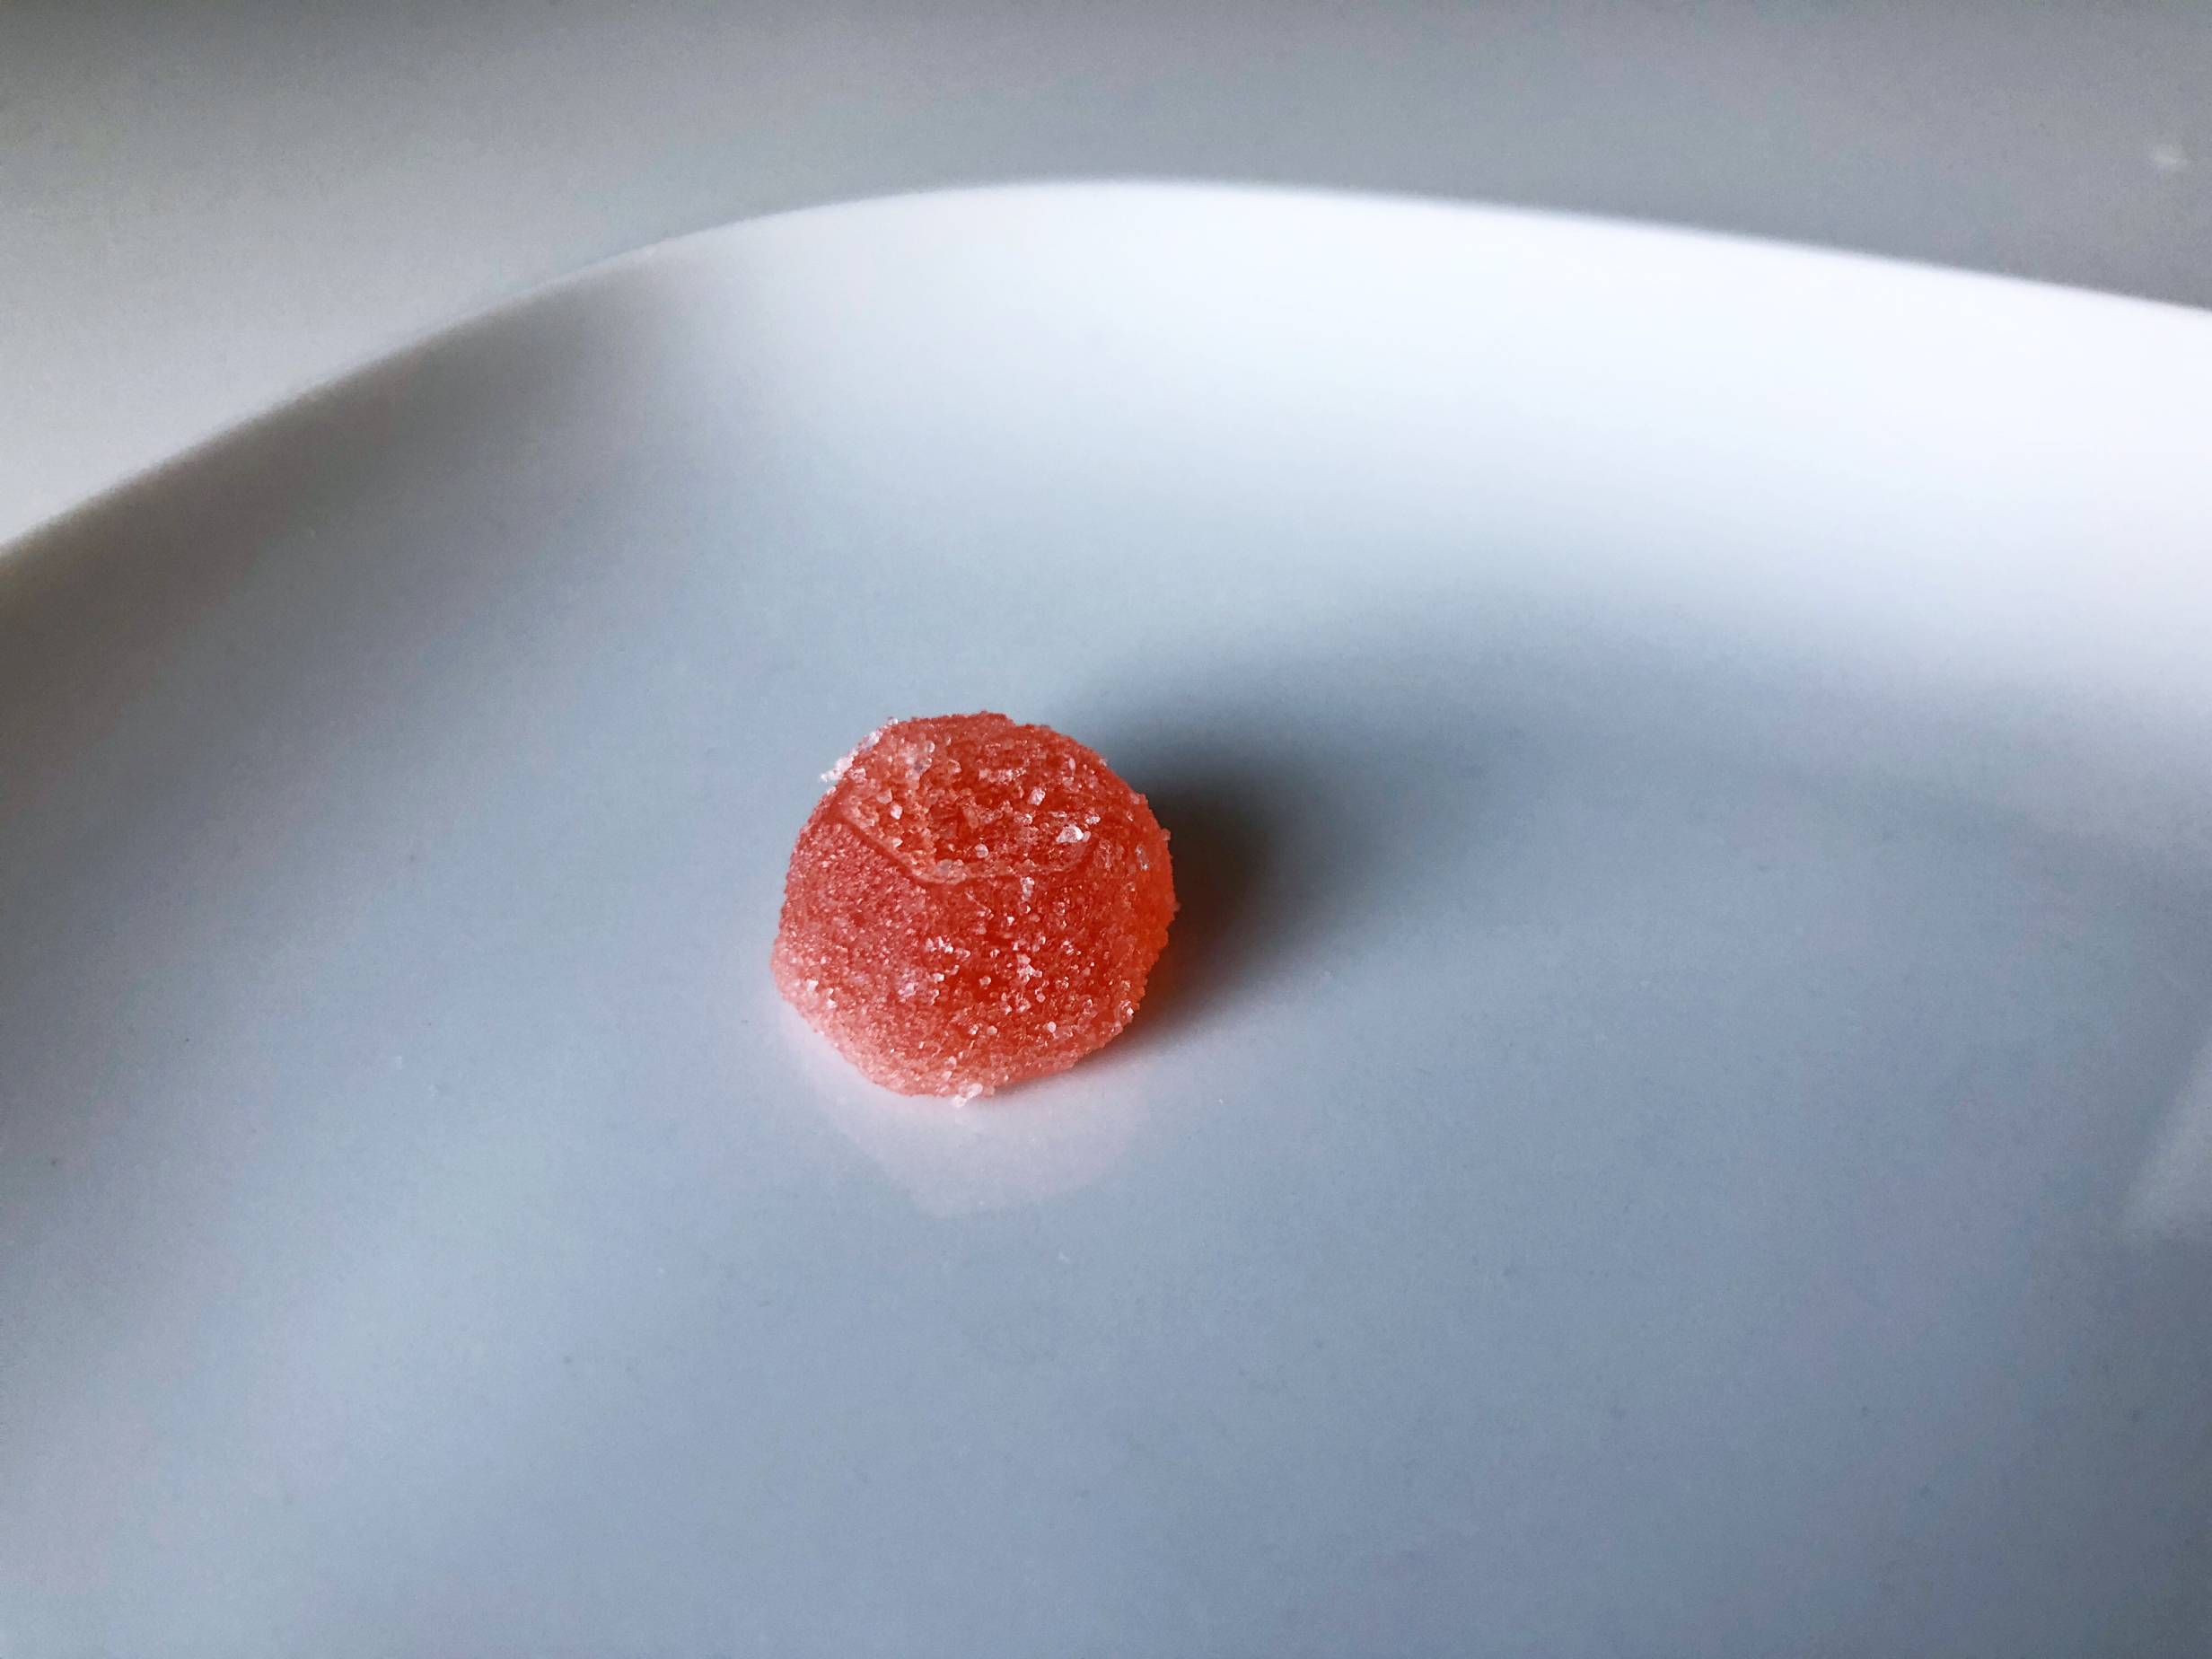 A round, spherical orange gummy covered in sugar sits on a white plate. Photo by Alyssa Buckley.